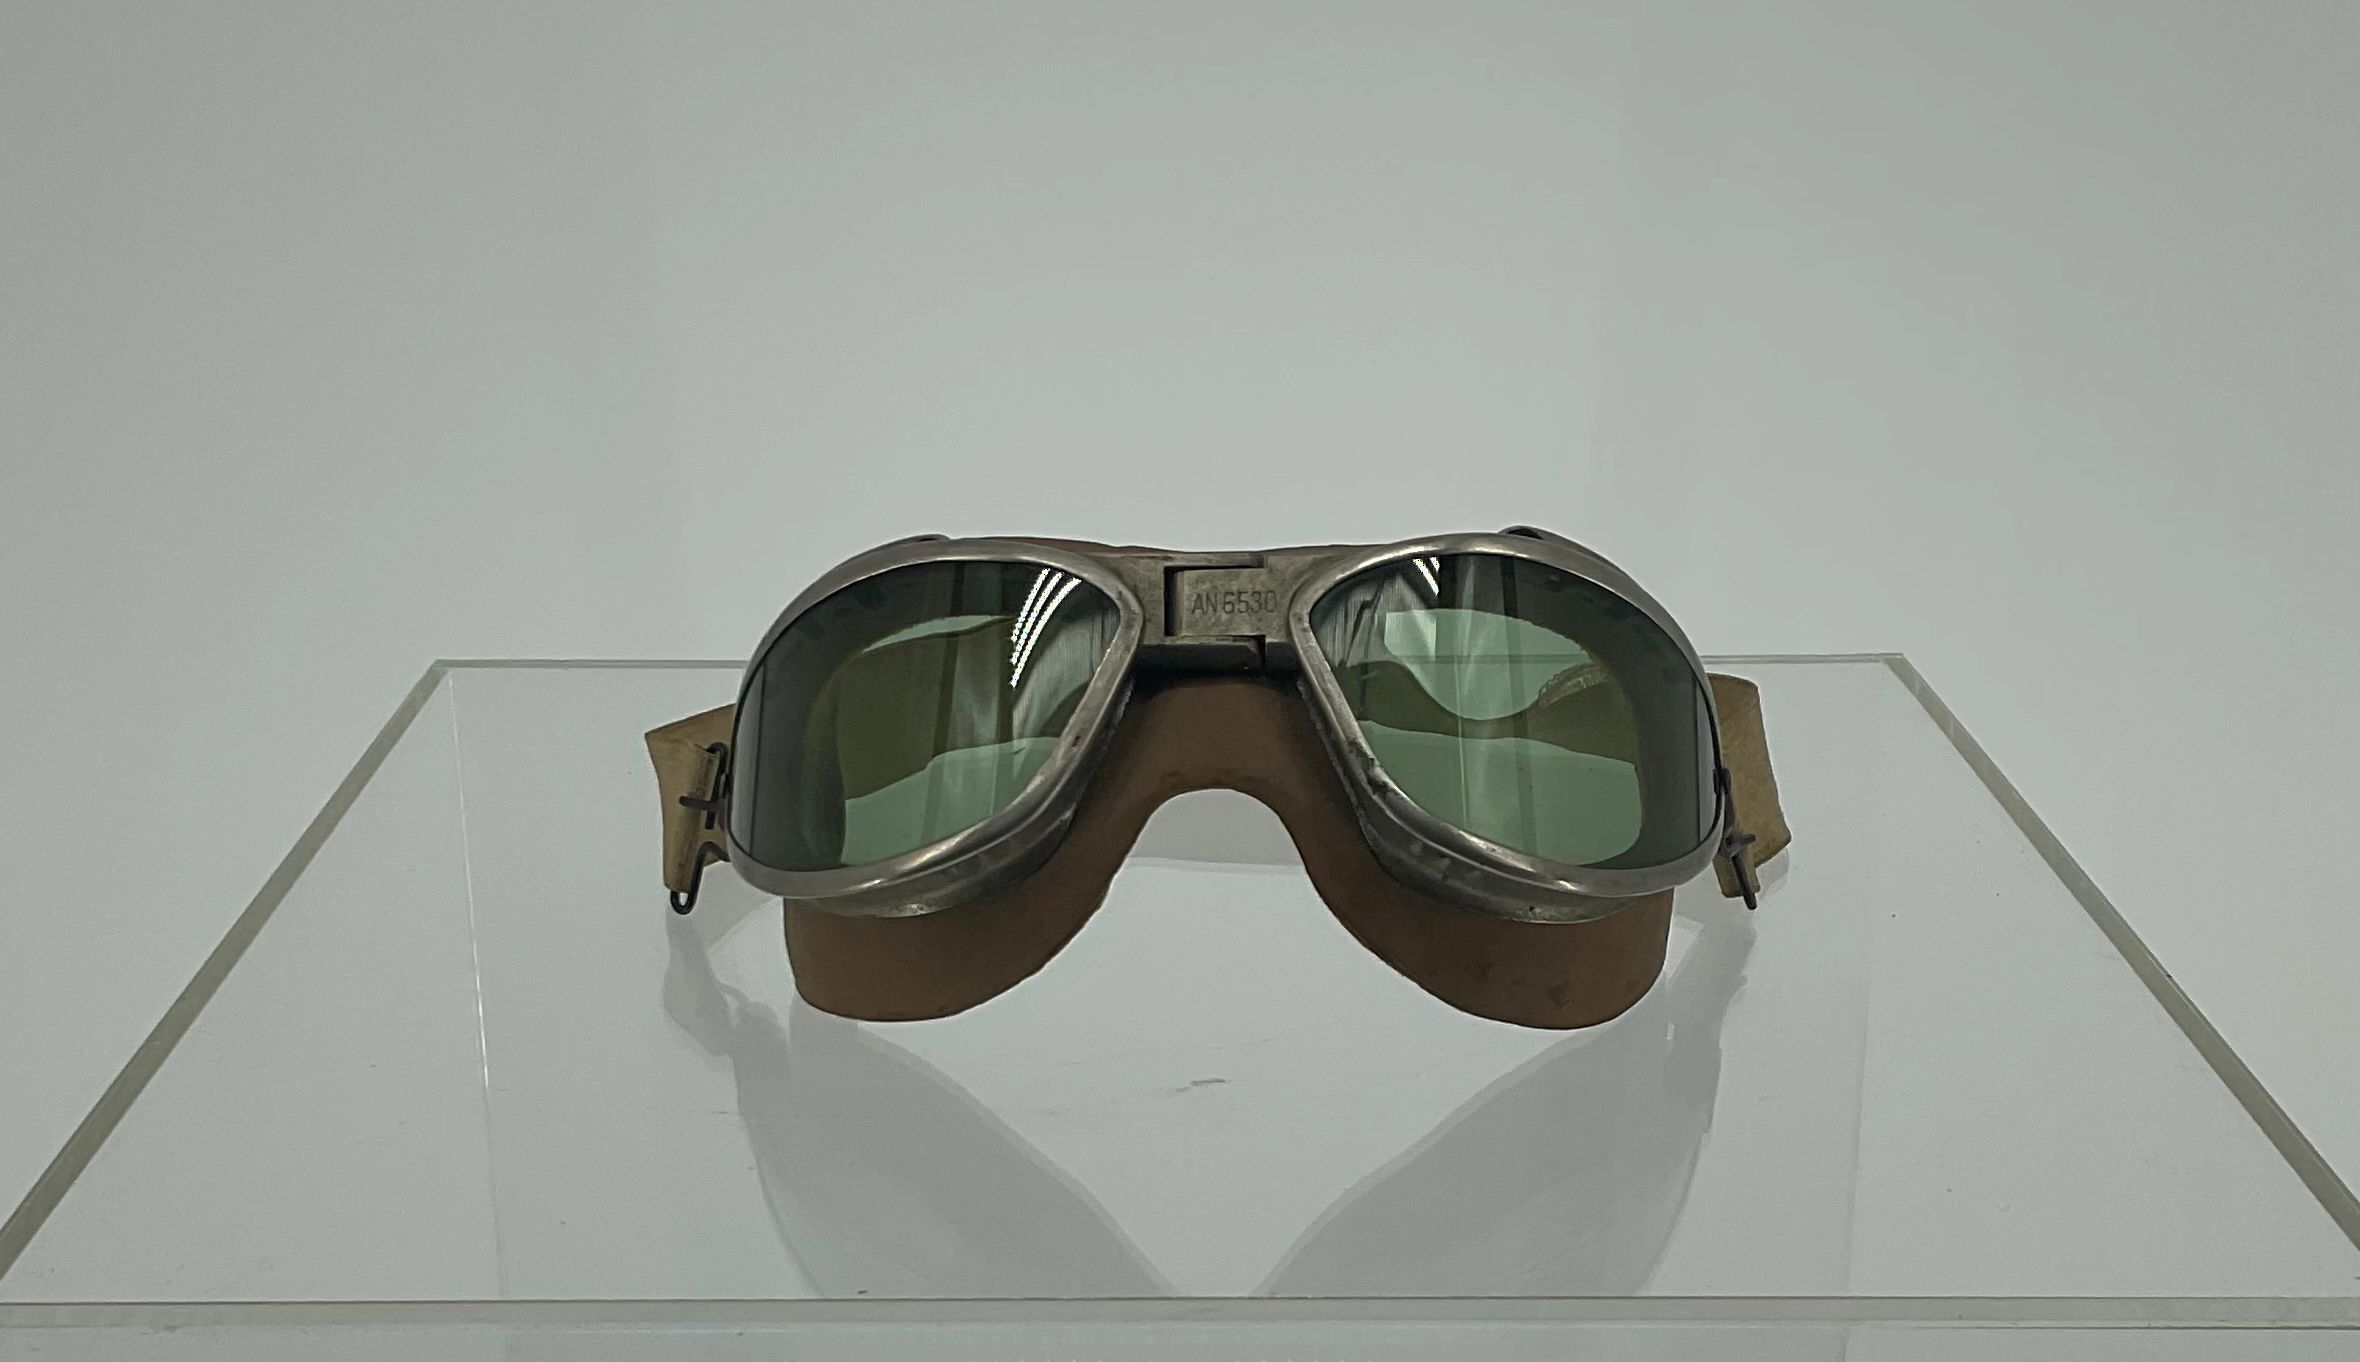 Primary Image of US Naval Aviator Goggles